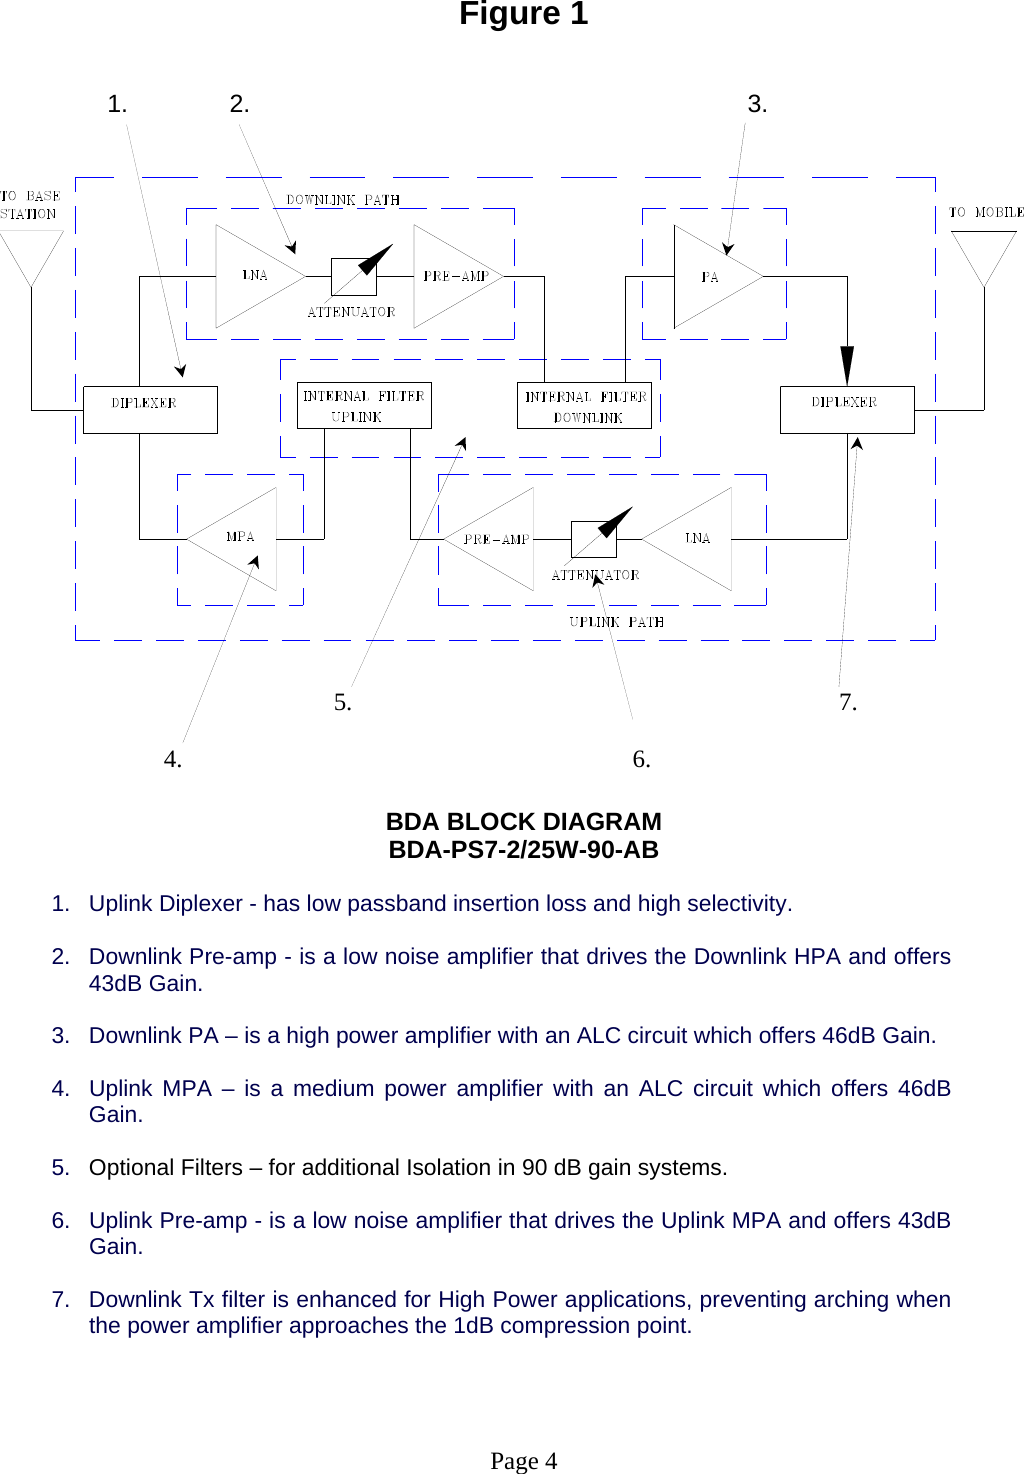 Figure 1            1.      2.                 3.                      5                         4.   .            7.                            6.  BDA BLOCK DIAGRAM  .  Uplink Diplexer - has low passband insertion loss and high selectivity.  .  Downlink Pre-amp - is a low noise amplifier that drives the Downlink HPA and offers .  Downlink PA – is a high power amplifier with an ALC circuit which offers 46dB Gain. .  Uplink MPA – is a medium power amplifier with an ALC circuit which offers 46dB .  Optional Filters – for additional Isolation in 90 dB ms. BDA-PS7-2/25W-90-AB 1 243dB Gain.  3 4Gain.  5 gain syste 6.  w noise amplifier that drives the Uplink MPA and offers 43dB .  Downlink Tx filter is enhanced for High Power applications, preventing arching when   Page 4 Uplink Pre-amp - is a loGain.  7the power amplifier approaches the 1dB compression point.   